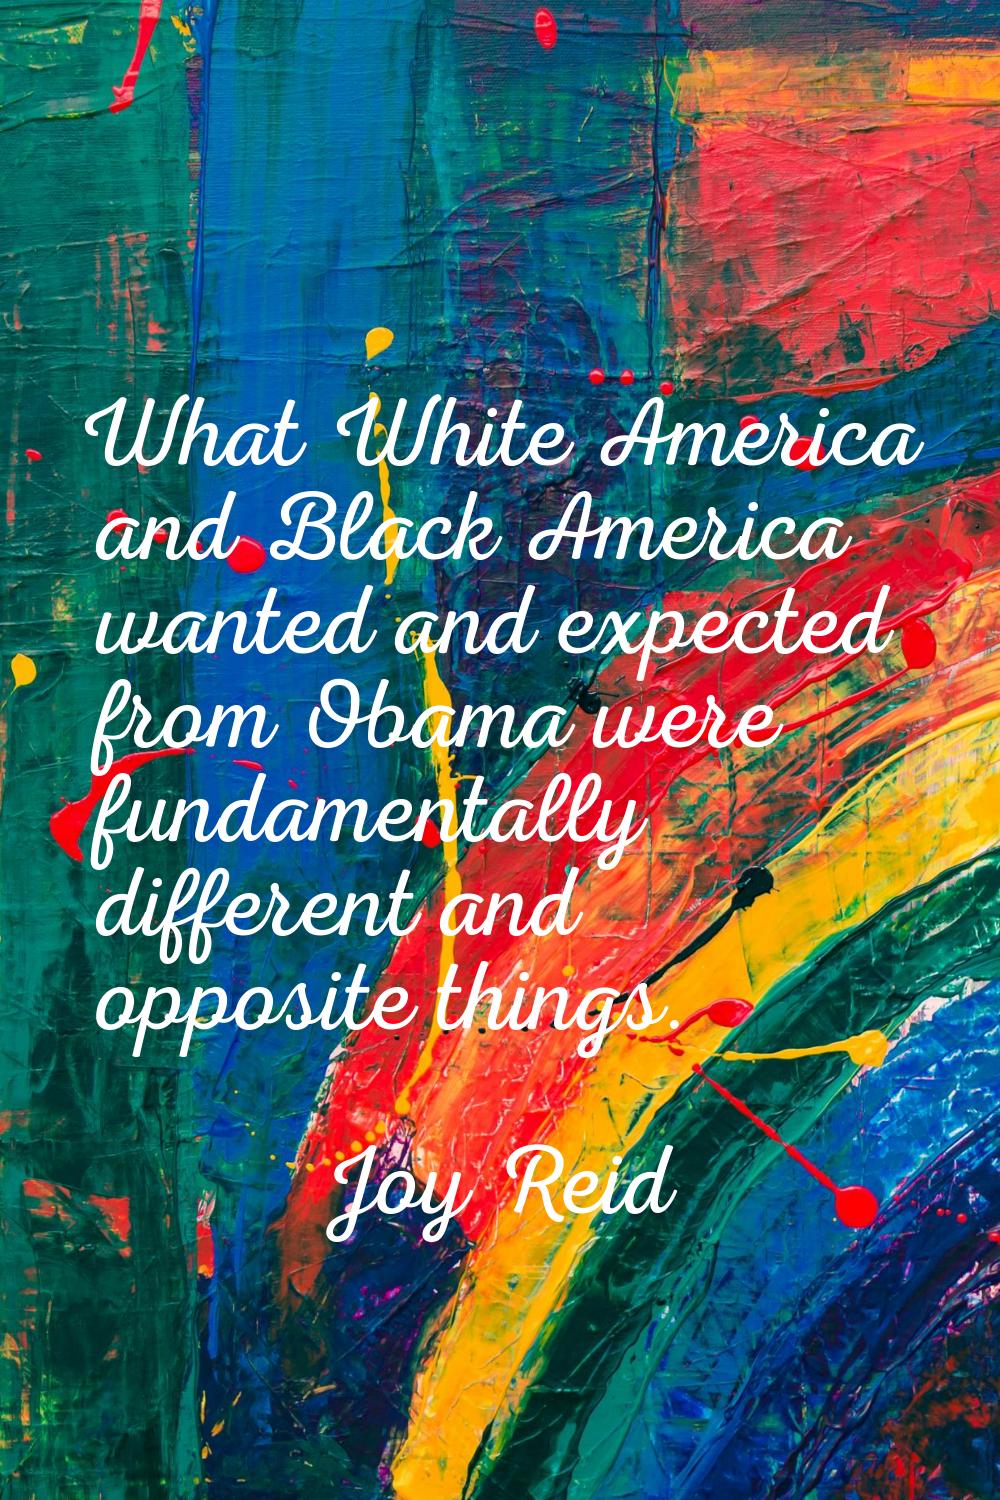 What White America and Black America wanted and expected from Obama were fundamentally different an